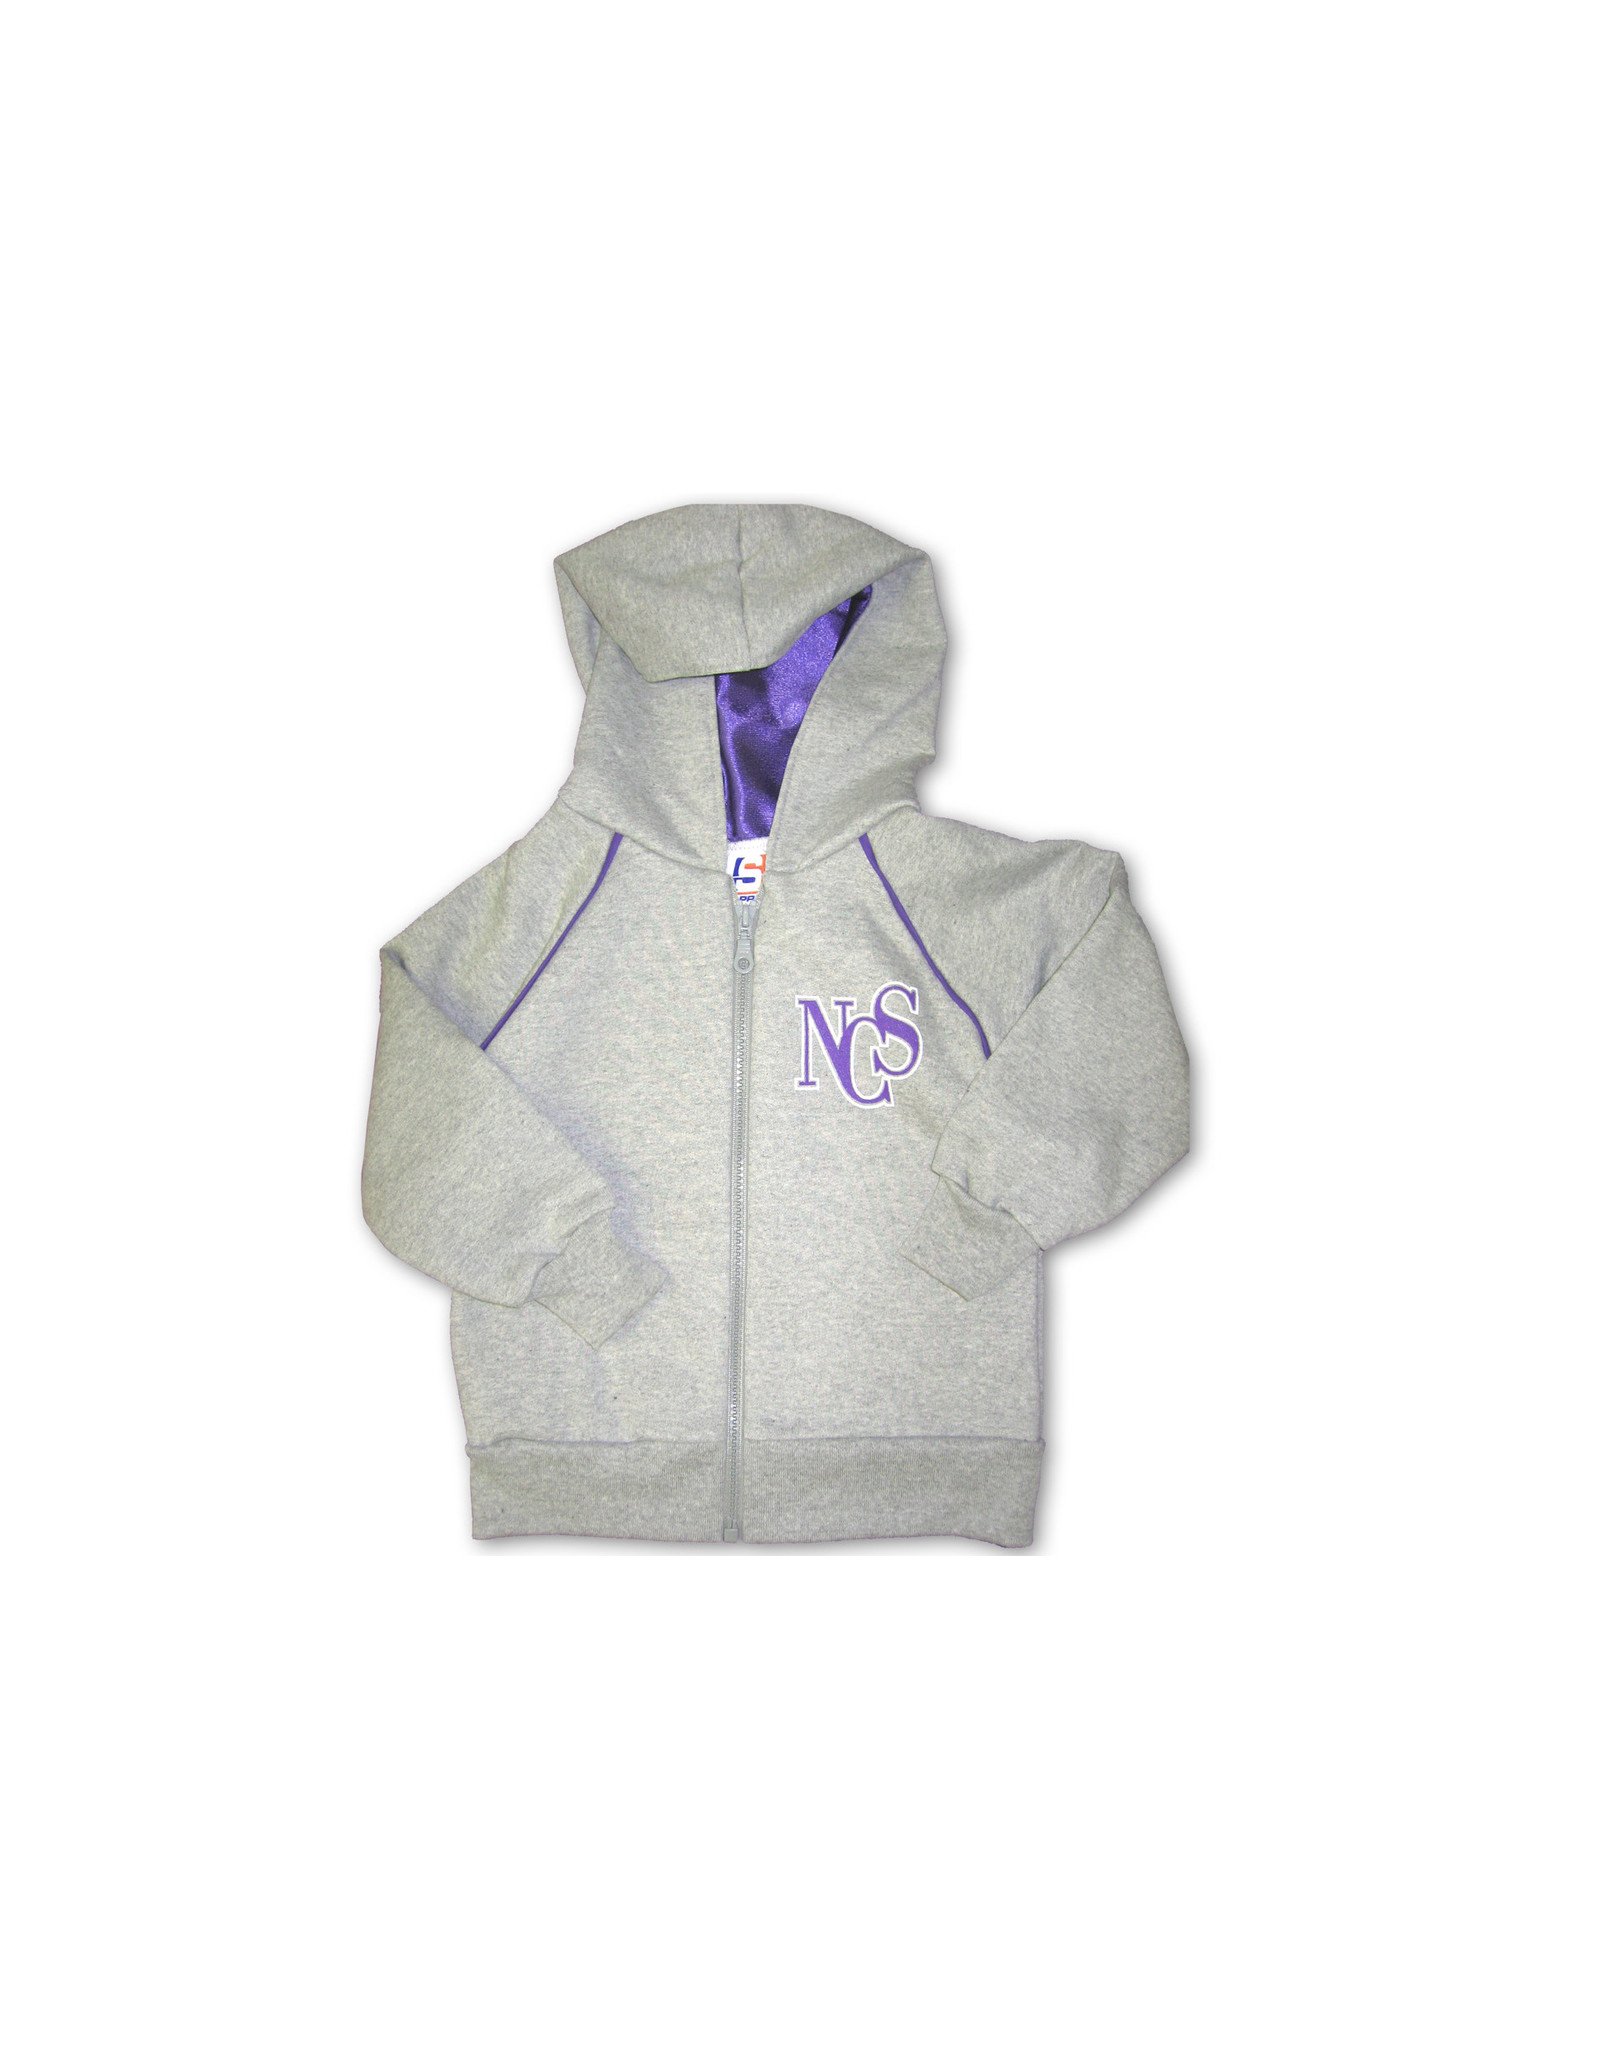 JACKET-GRY/PUR-CHILD-HOODED